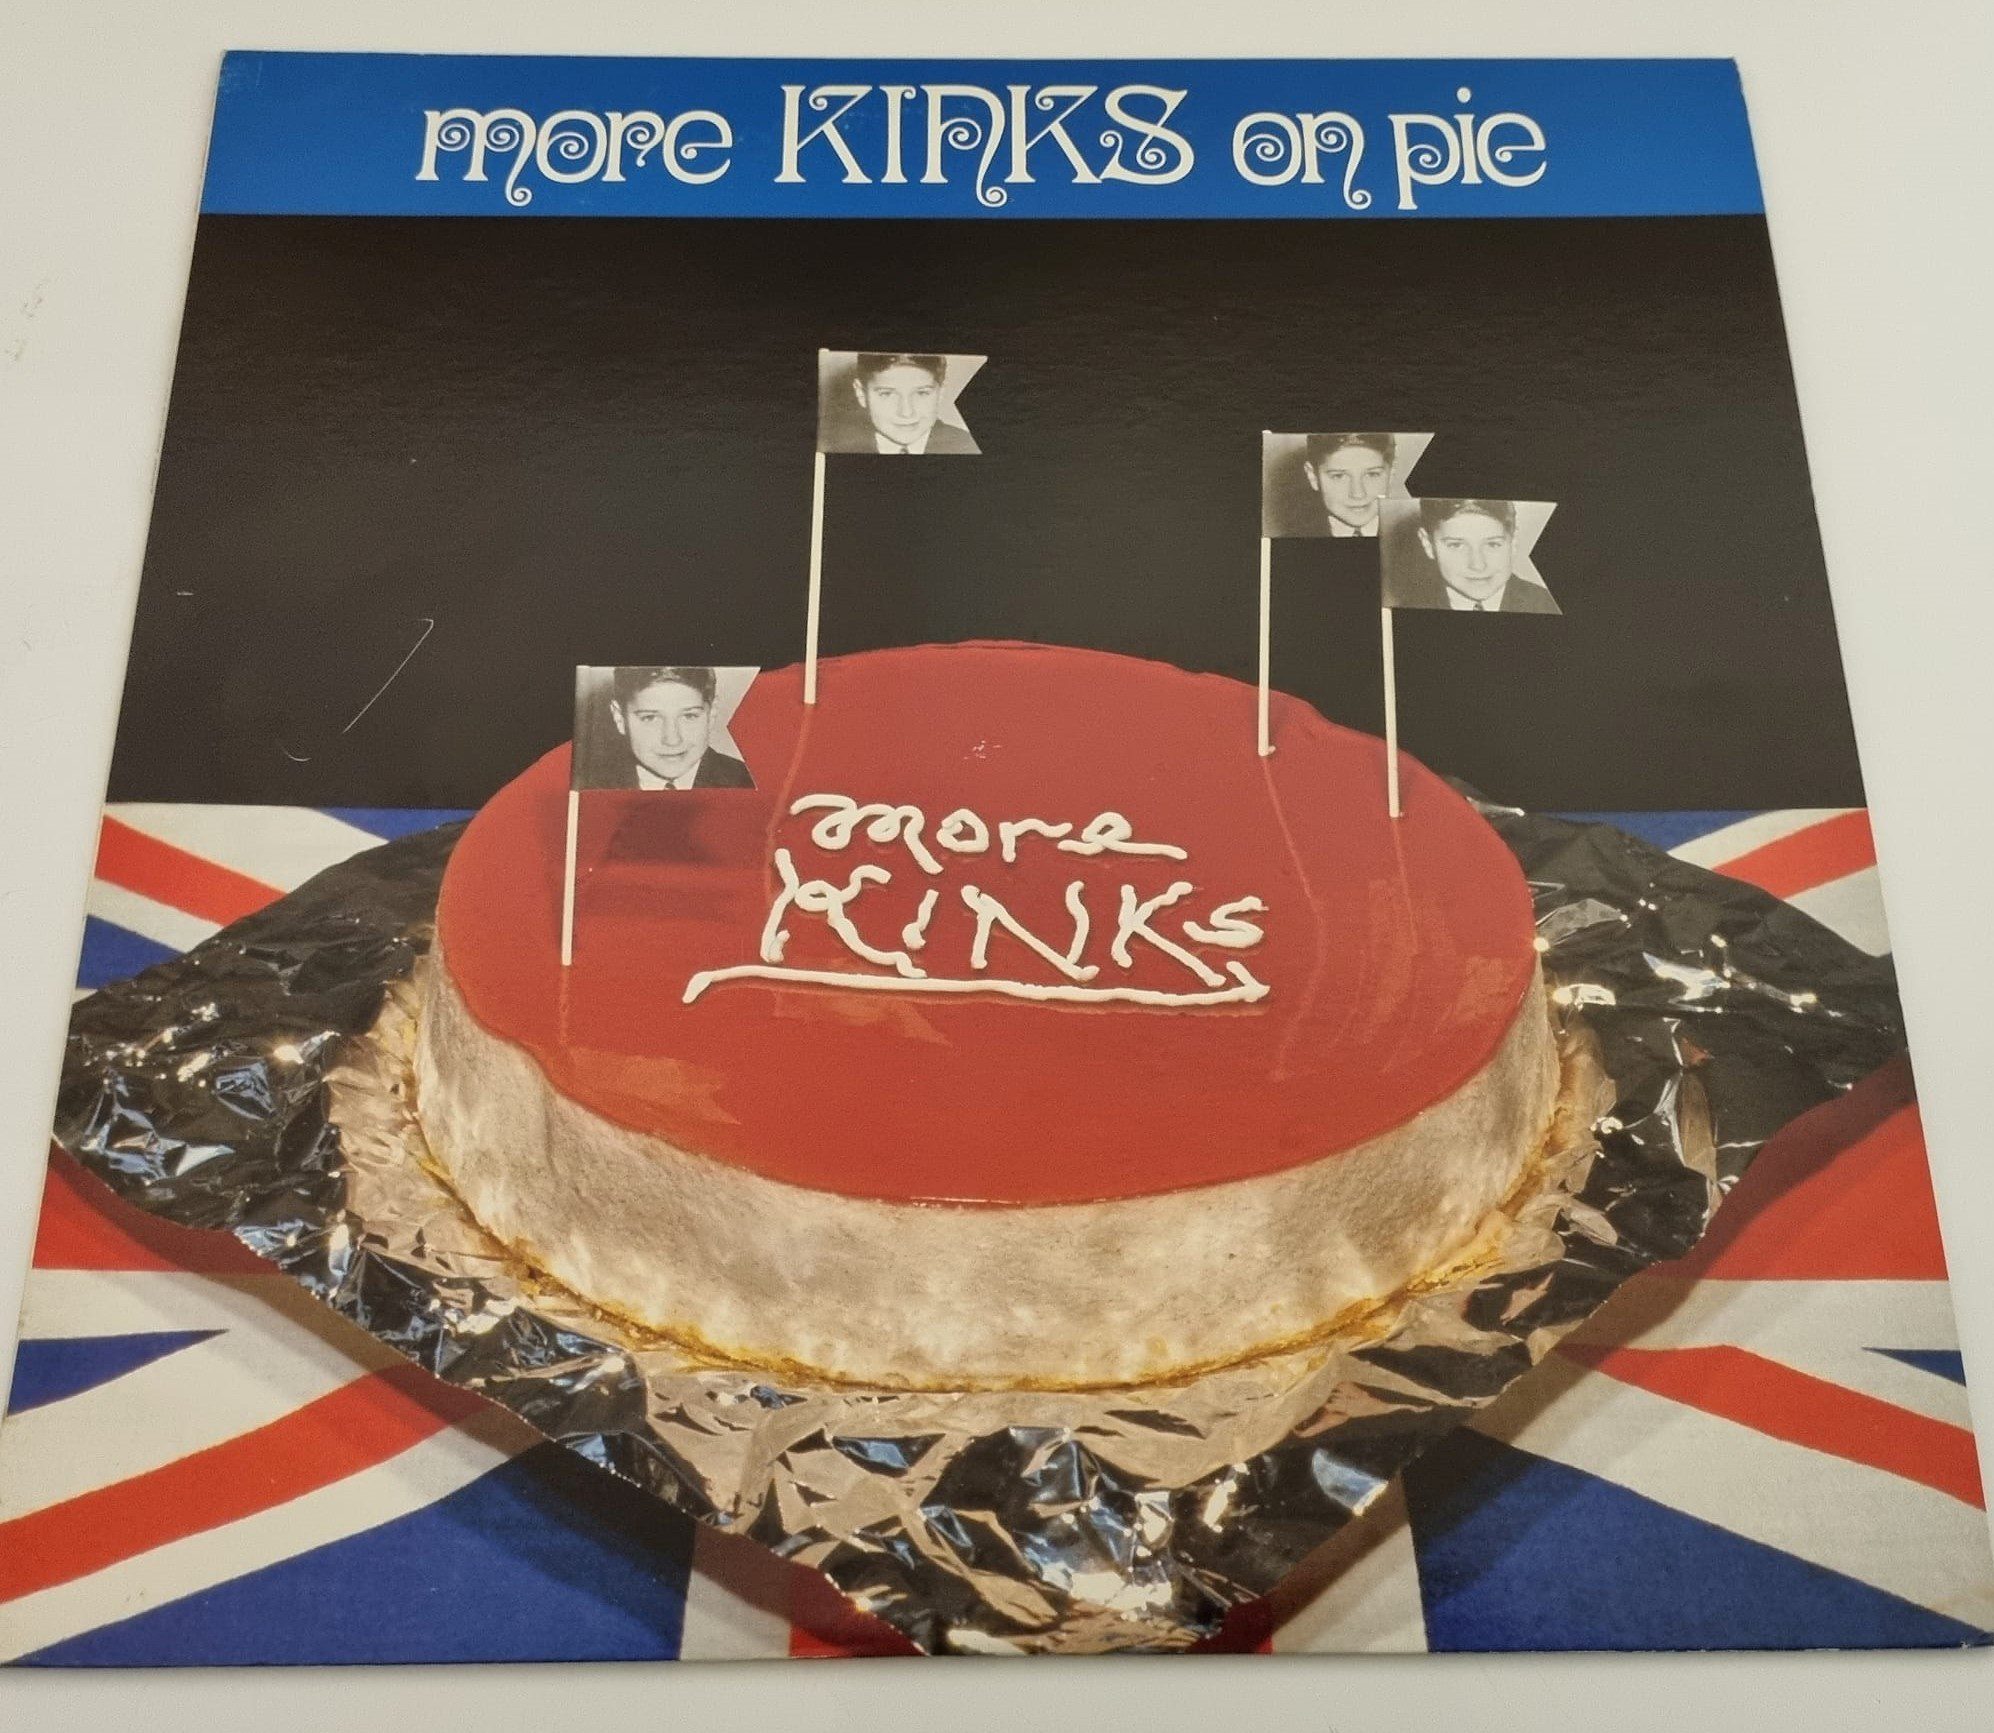 Buy this rare Kinks record by clicking here